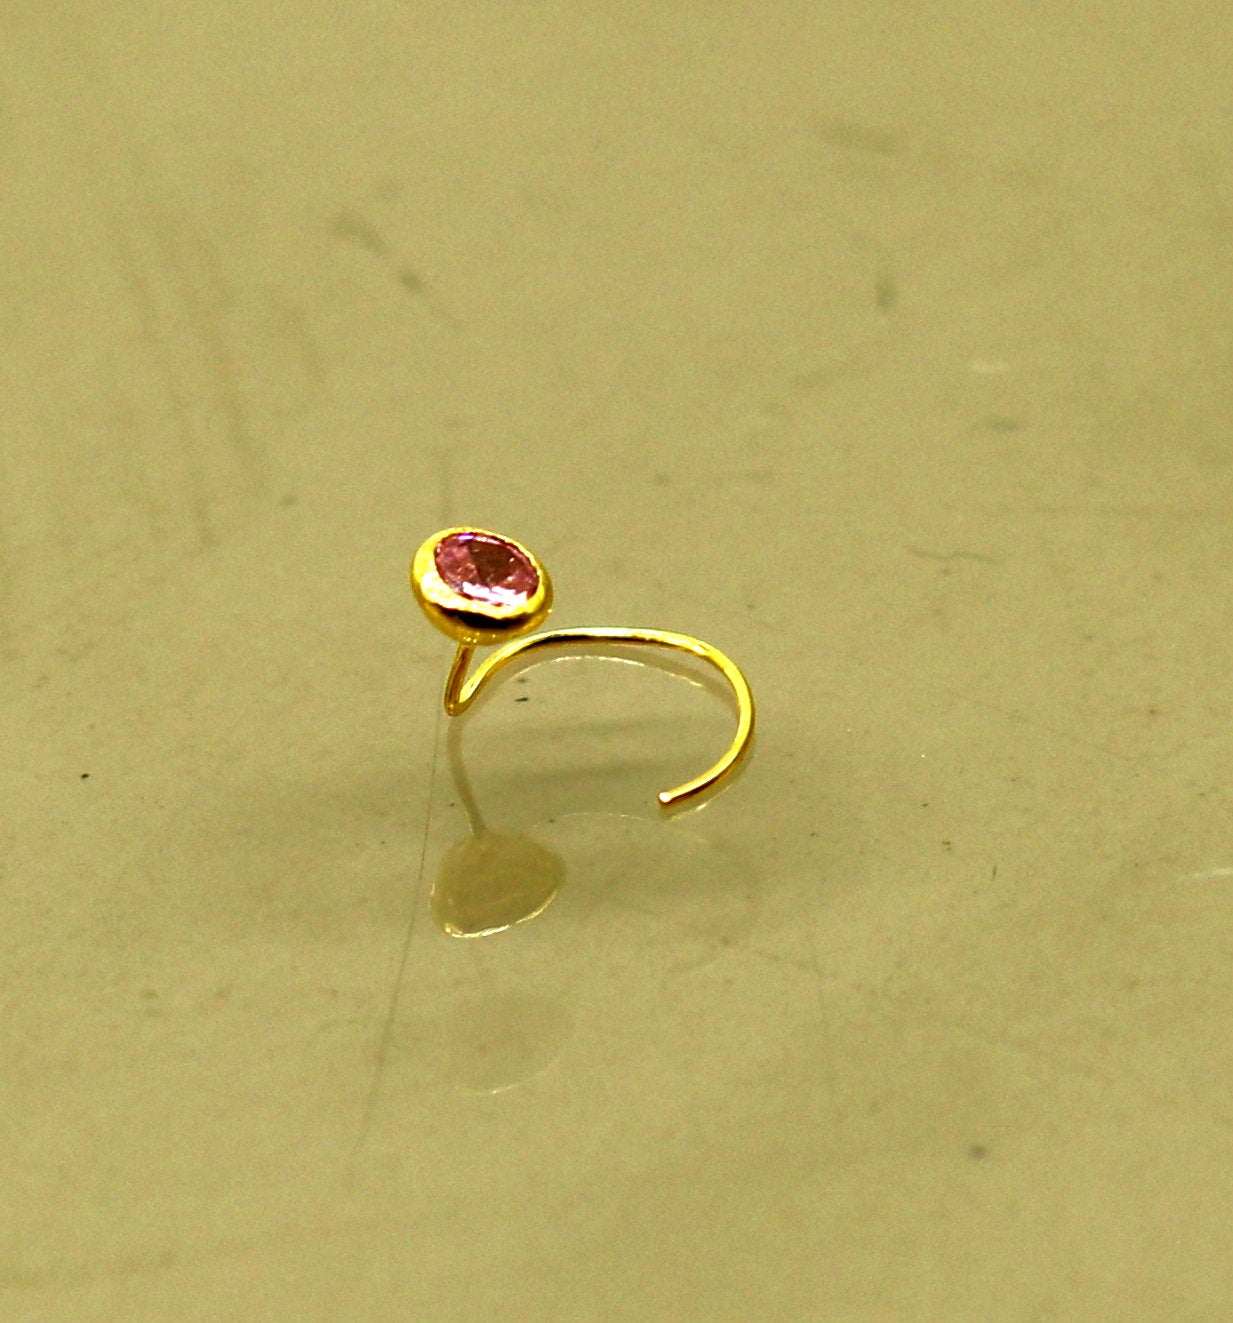 3.5mm tiny single pink stone 18kt  yellow gold handmade nose pin, excellent L band nose plug, nose wire, cartilage jewelry for girl's gnp34 - TRIBAL ORNAMENTS